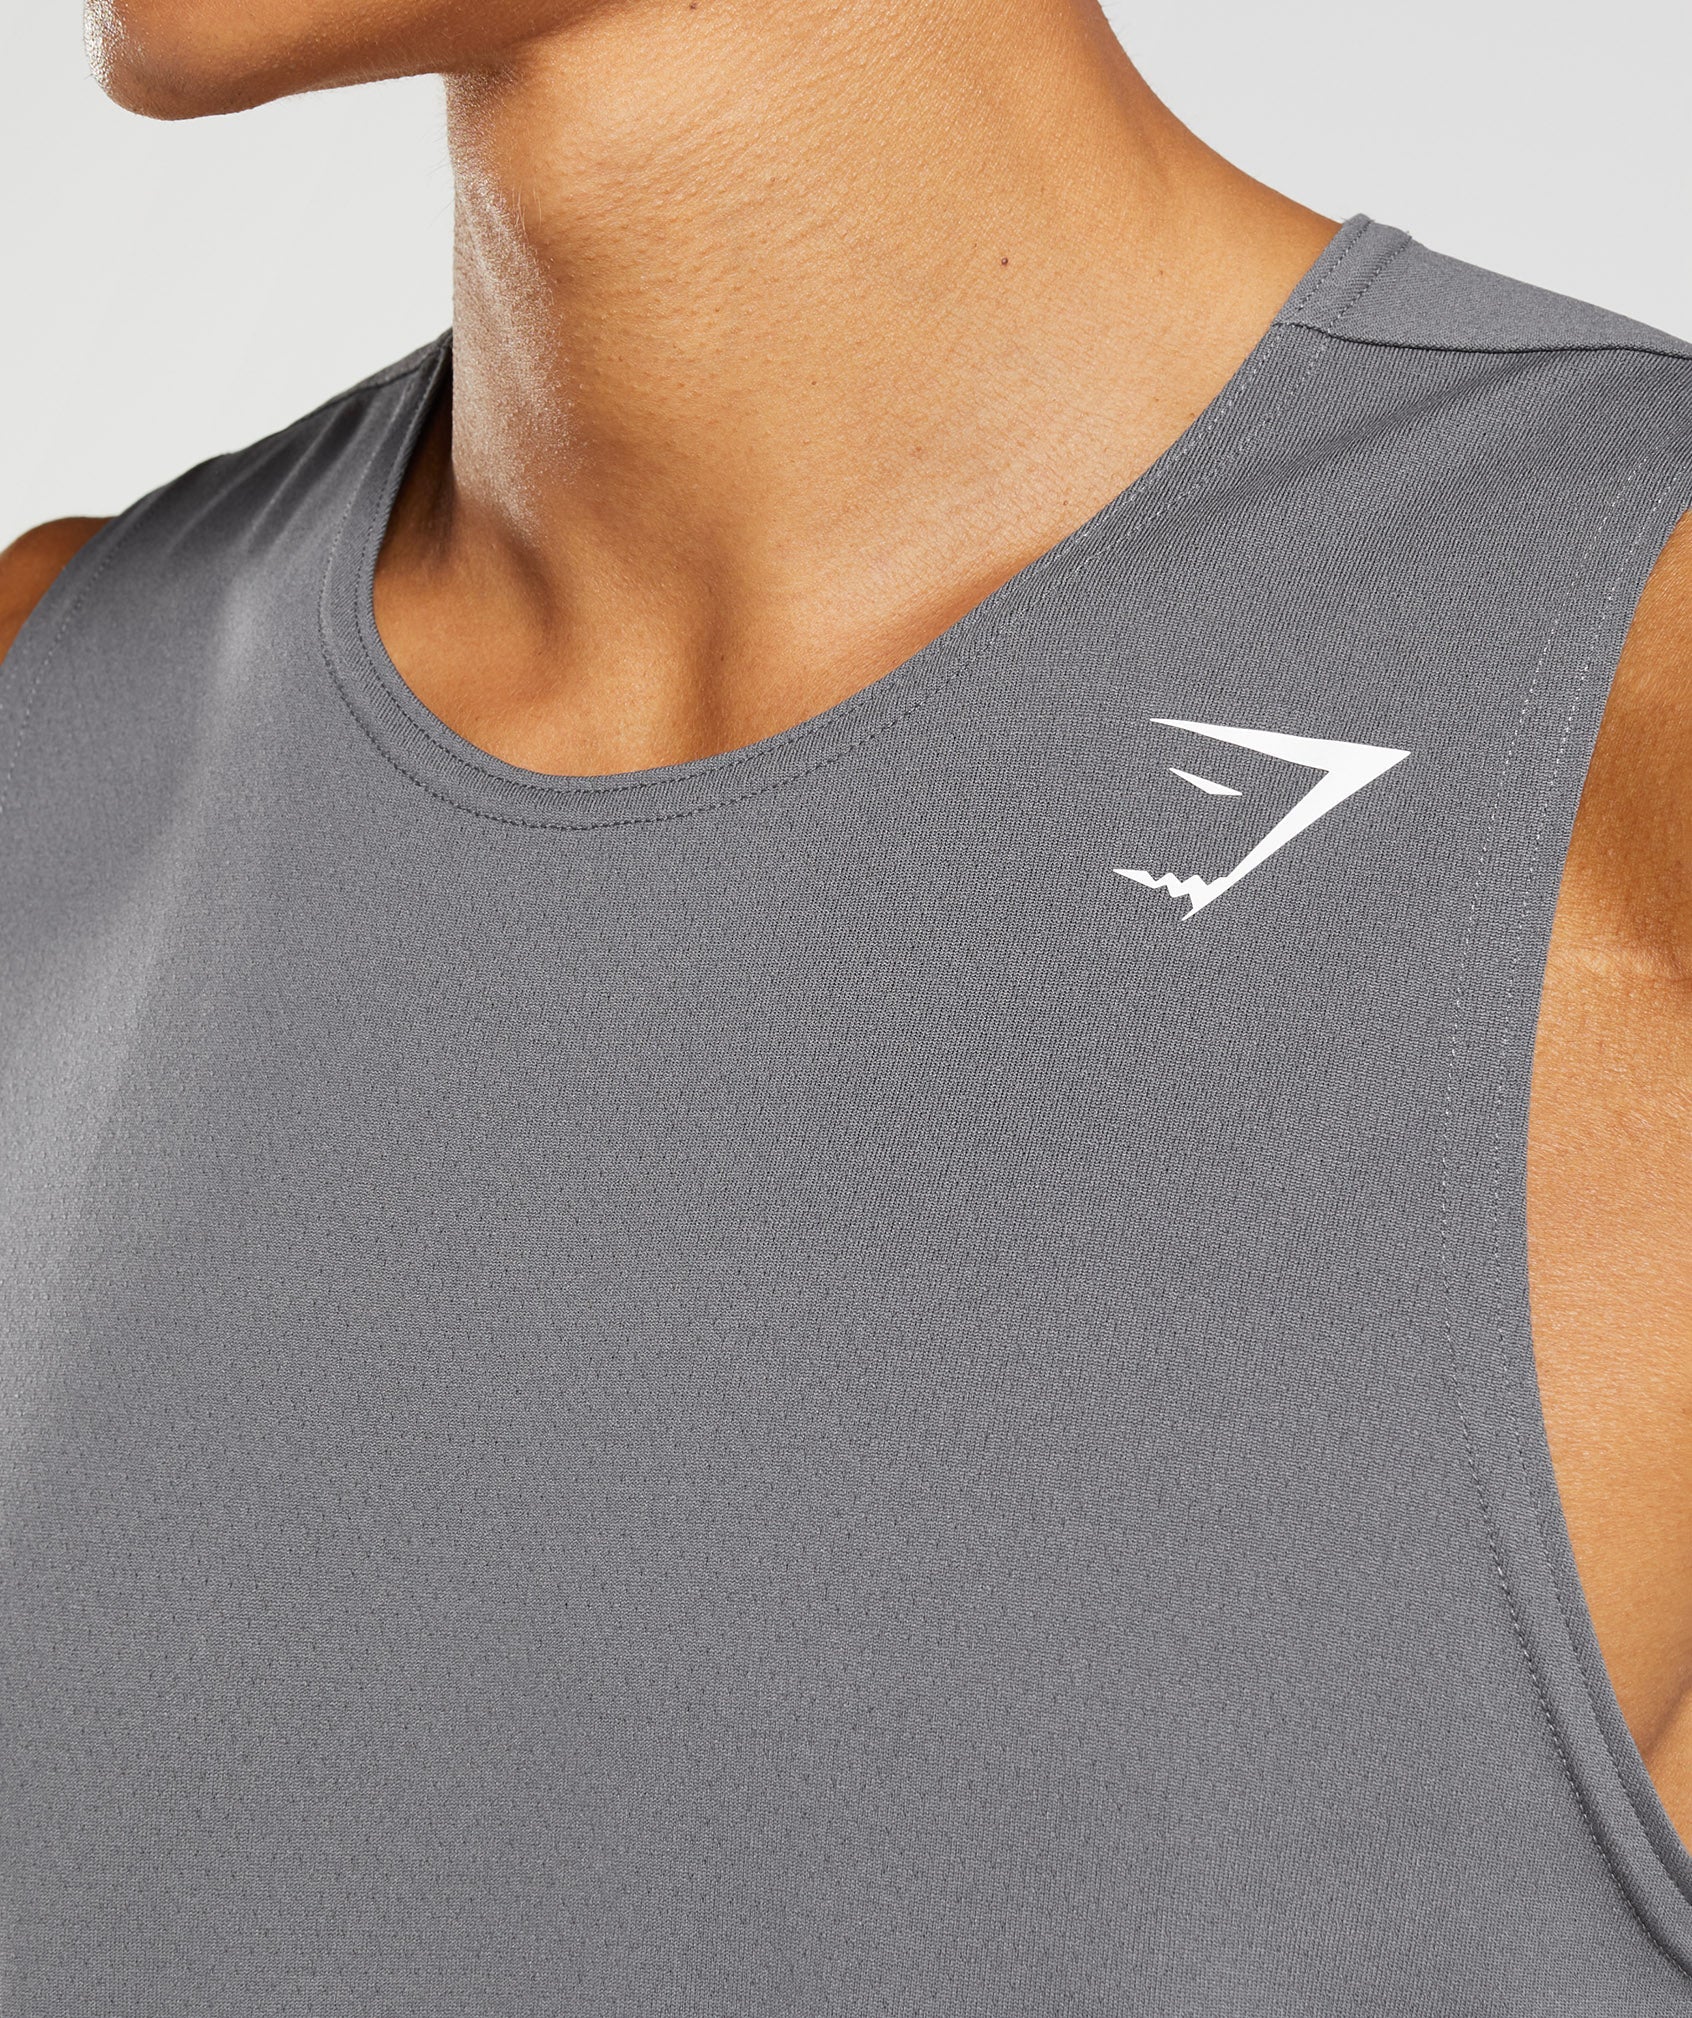 Arrival Tank in Silhouette Grey - view 3